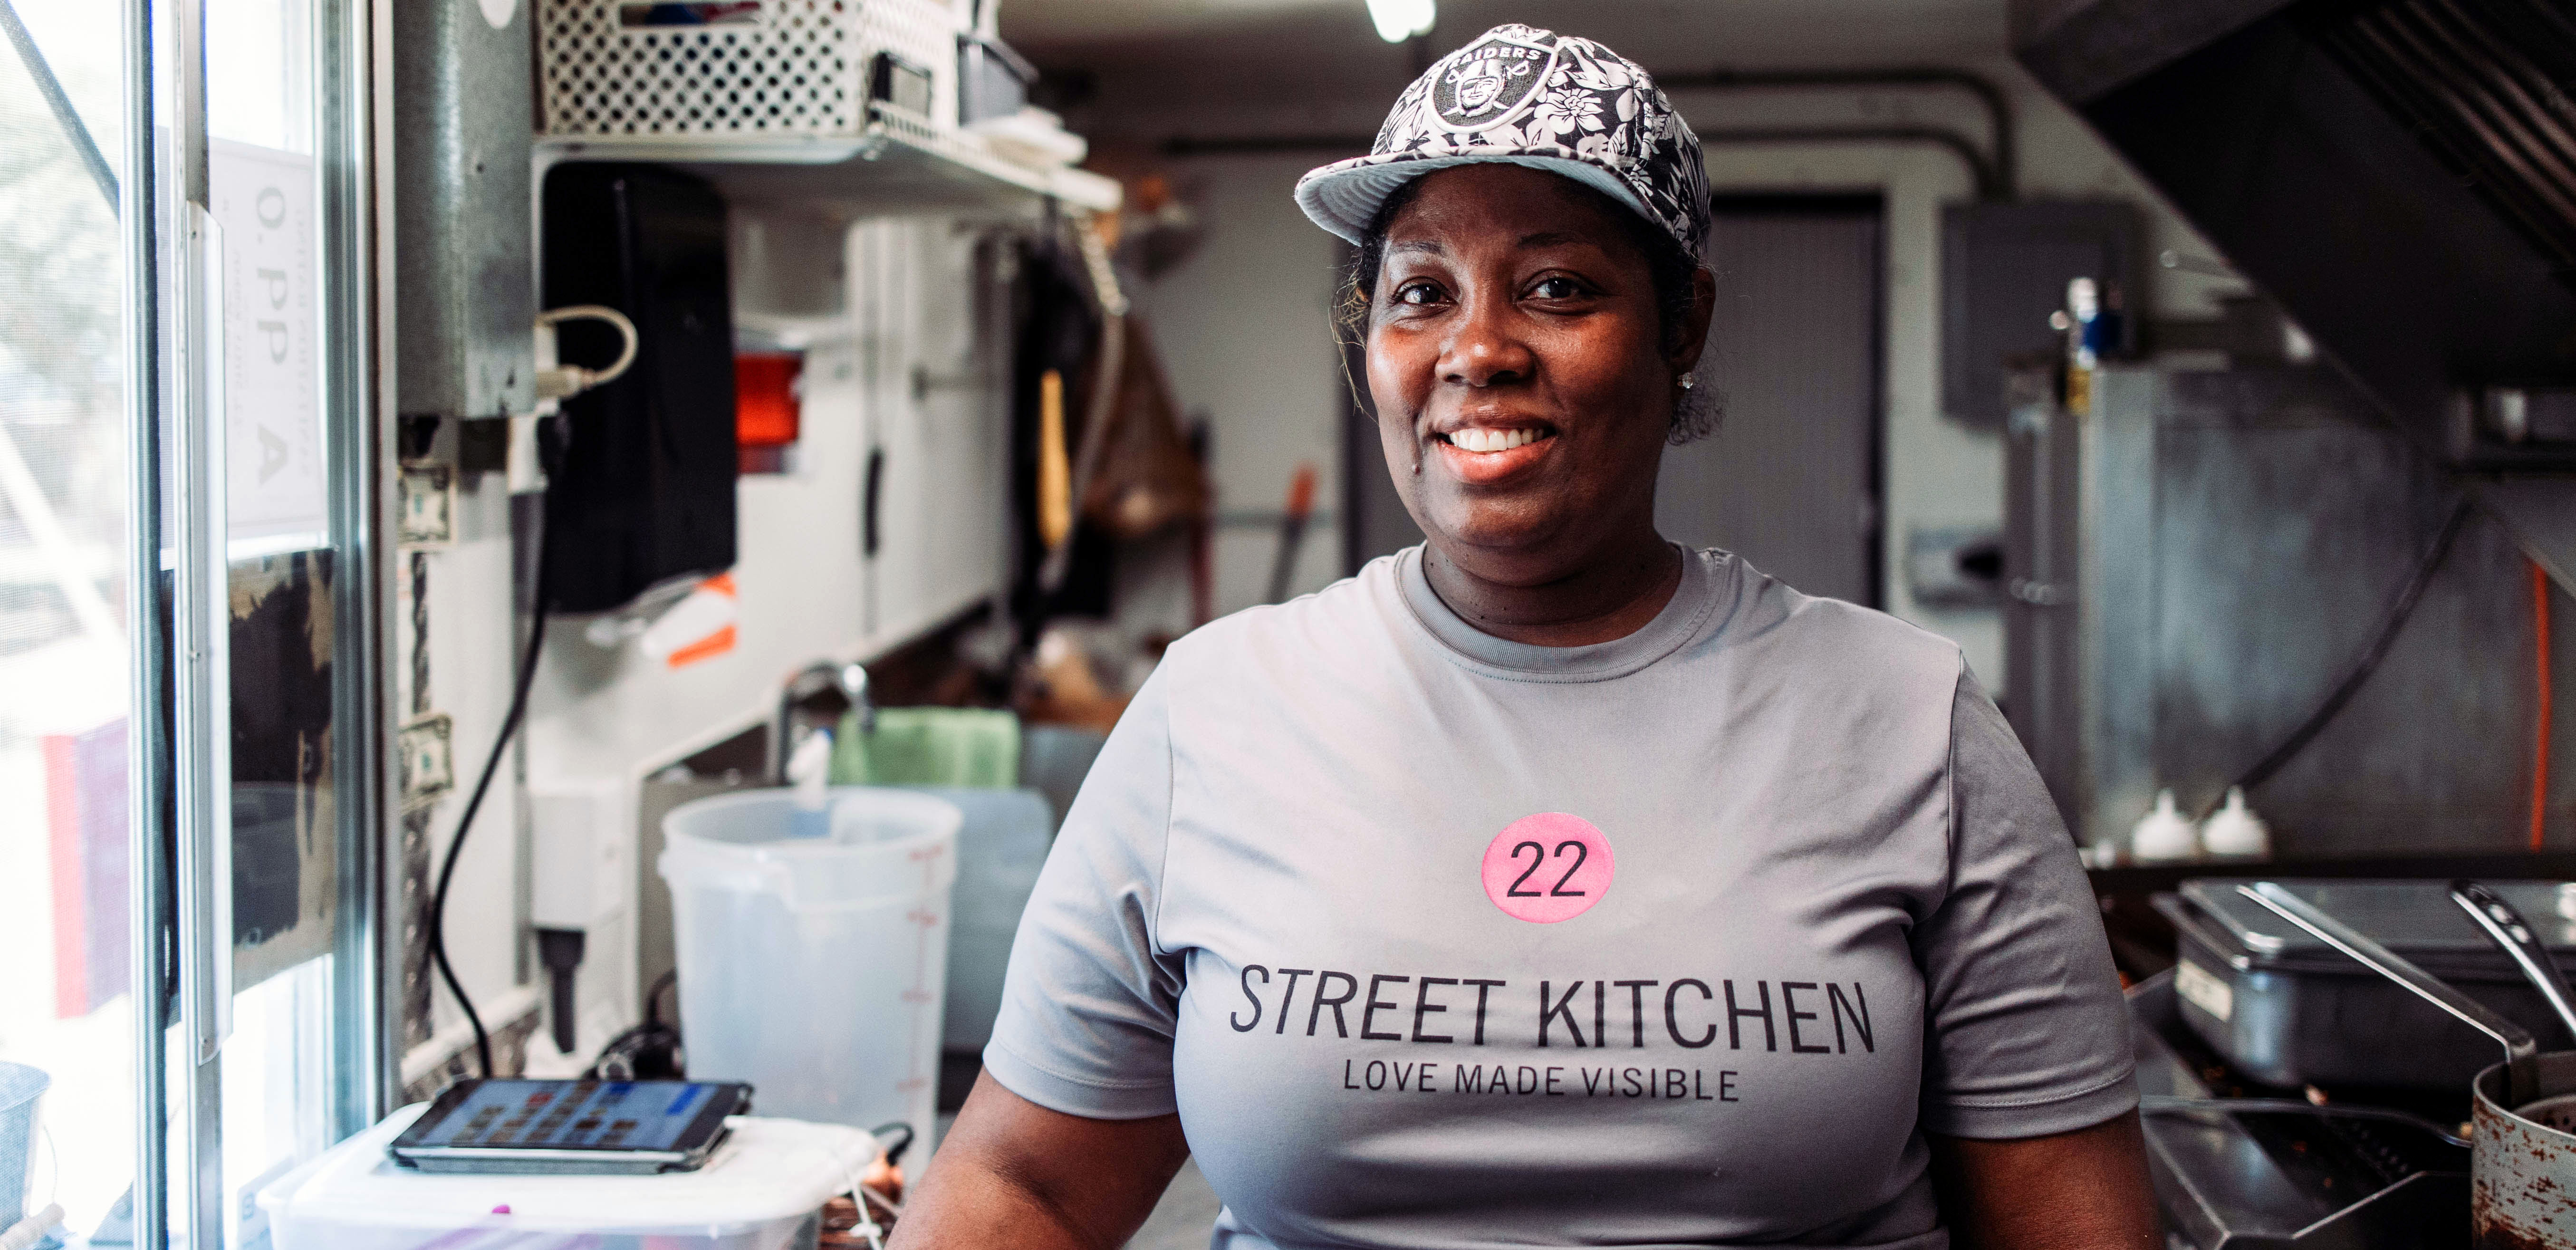 Felicia Reese owner of 22 Street Kitchen smiling big featured in her food truck, behind her is a stovetop grill and cooking appliances 